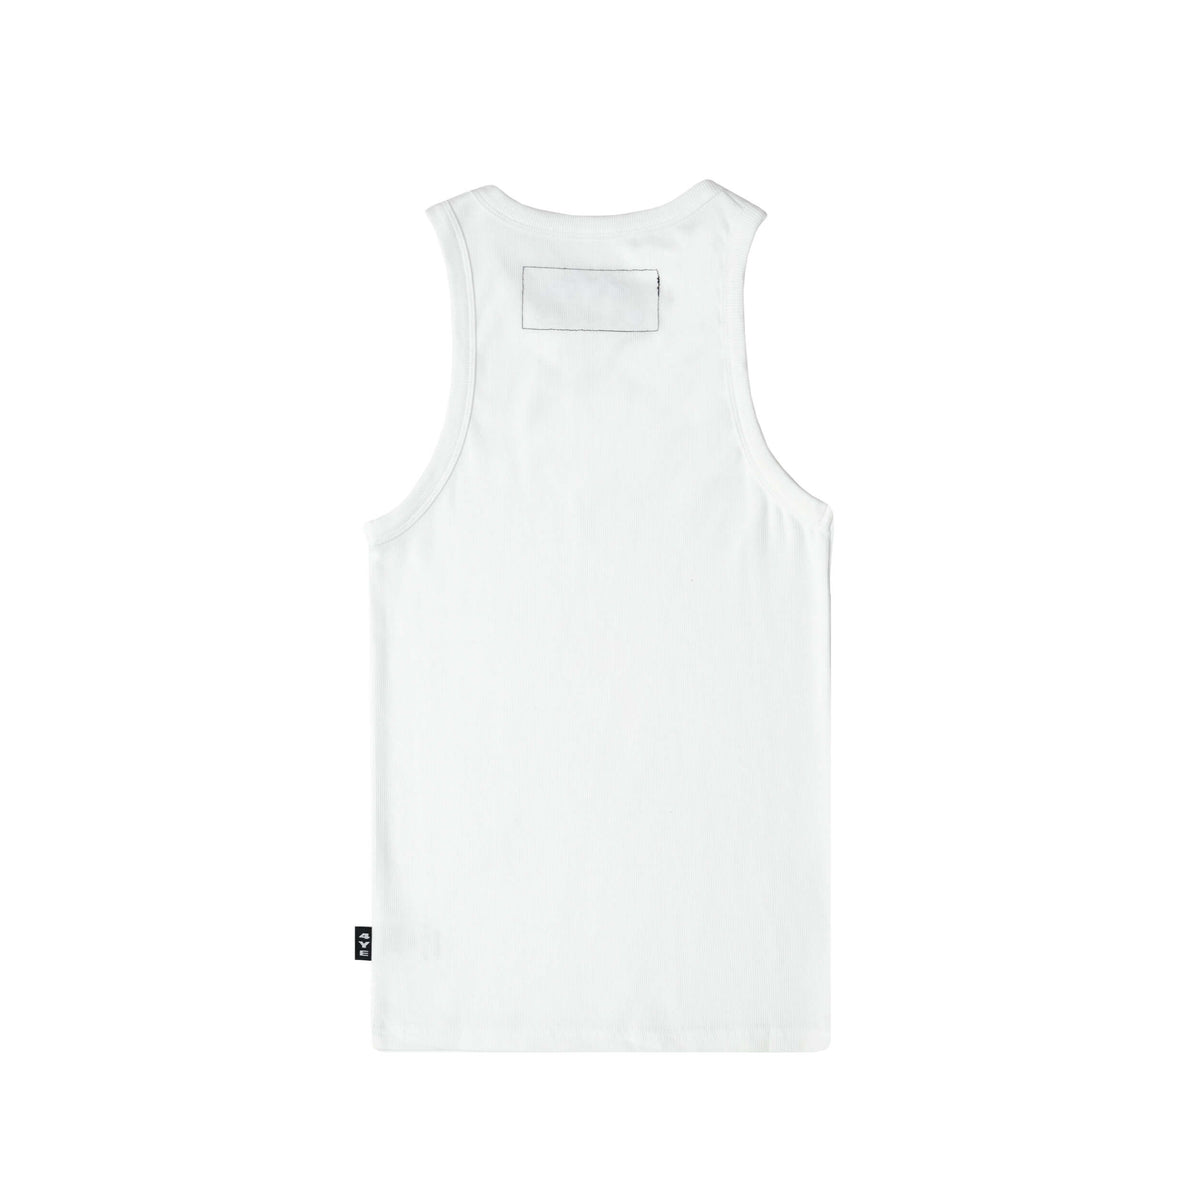 Back view of the 4YE Trompe L'oiel Tank in white, showing black stitching across tag and black 4YE side tag